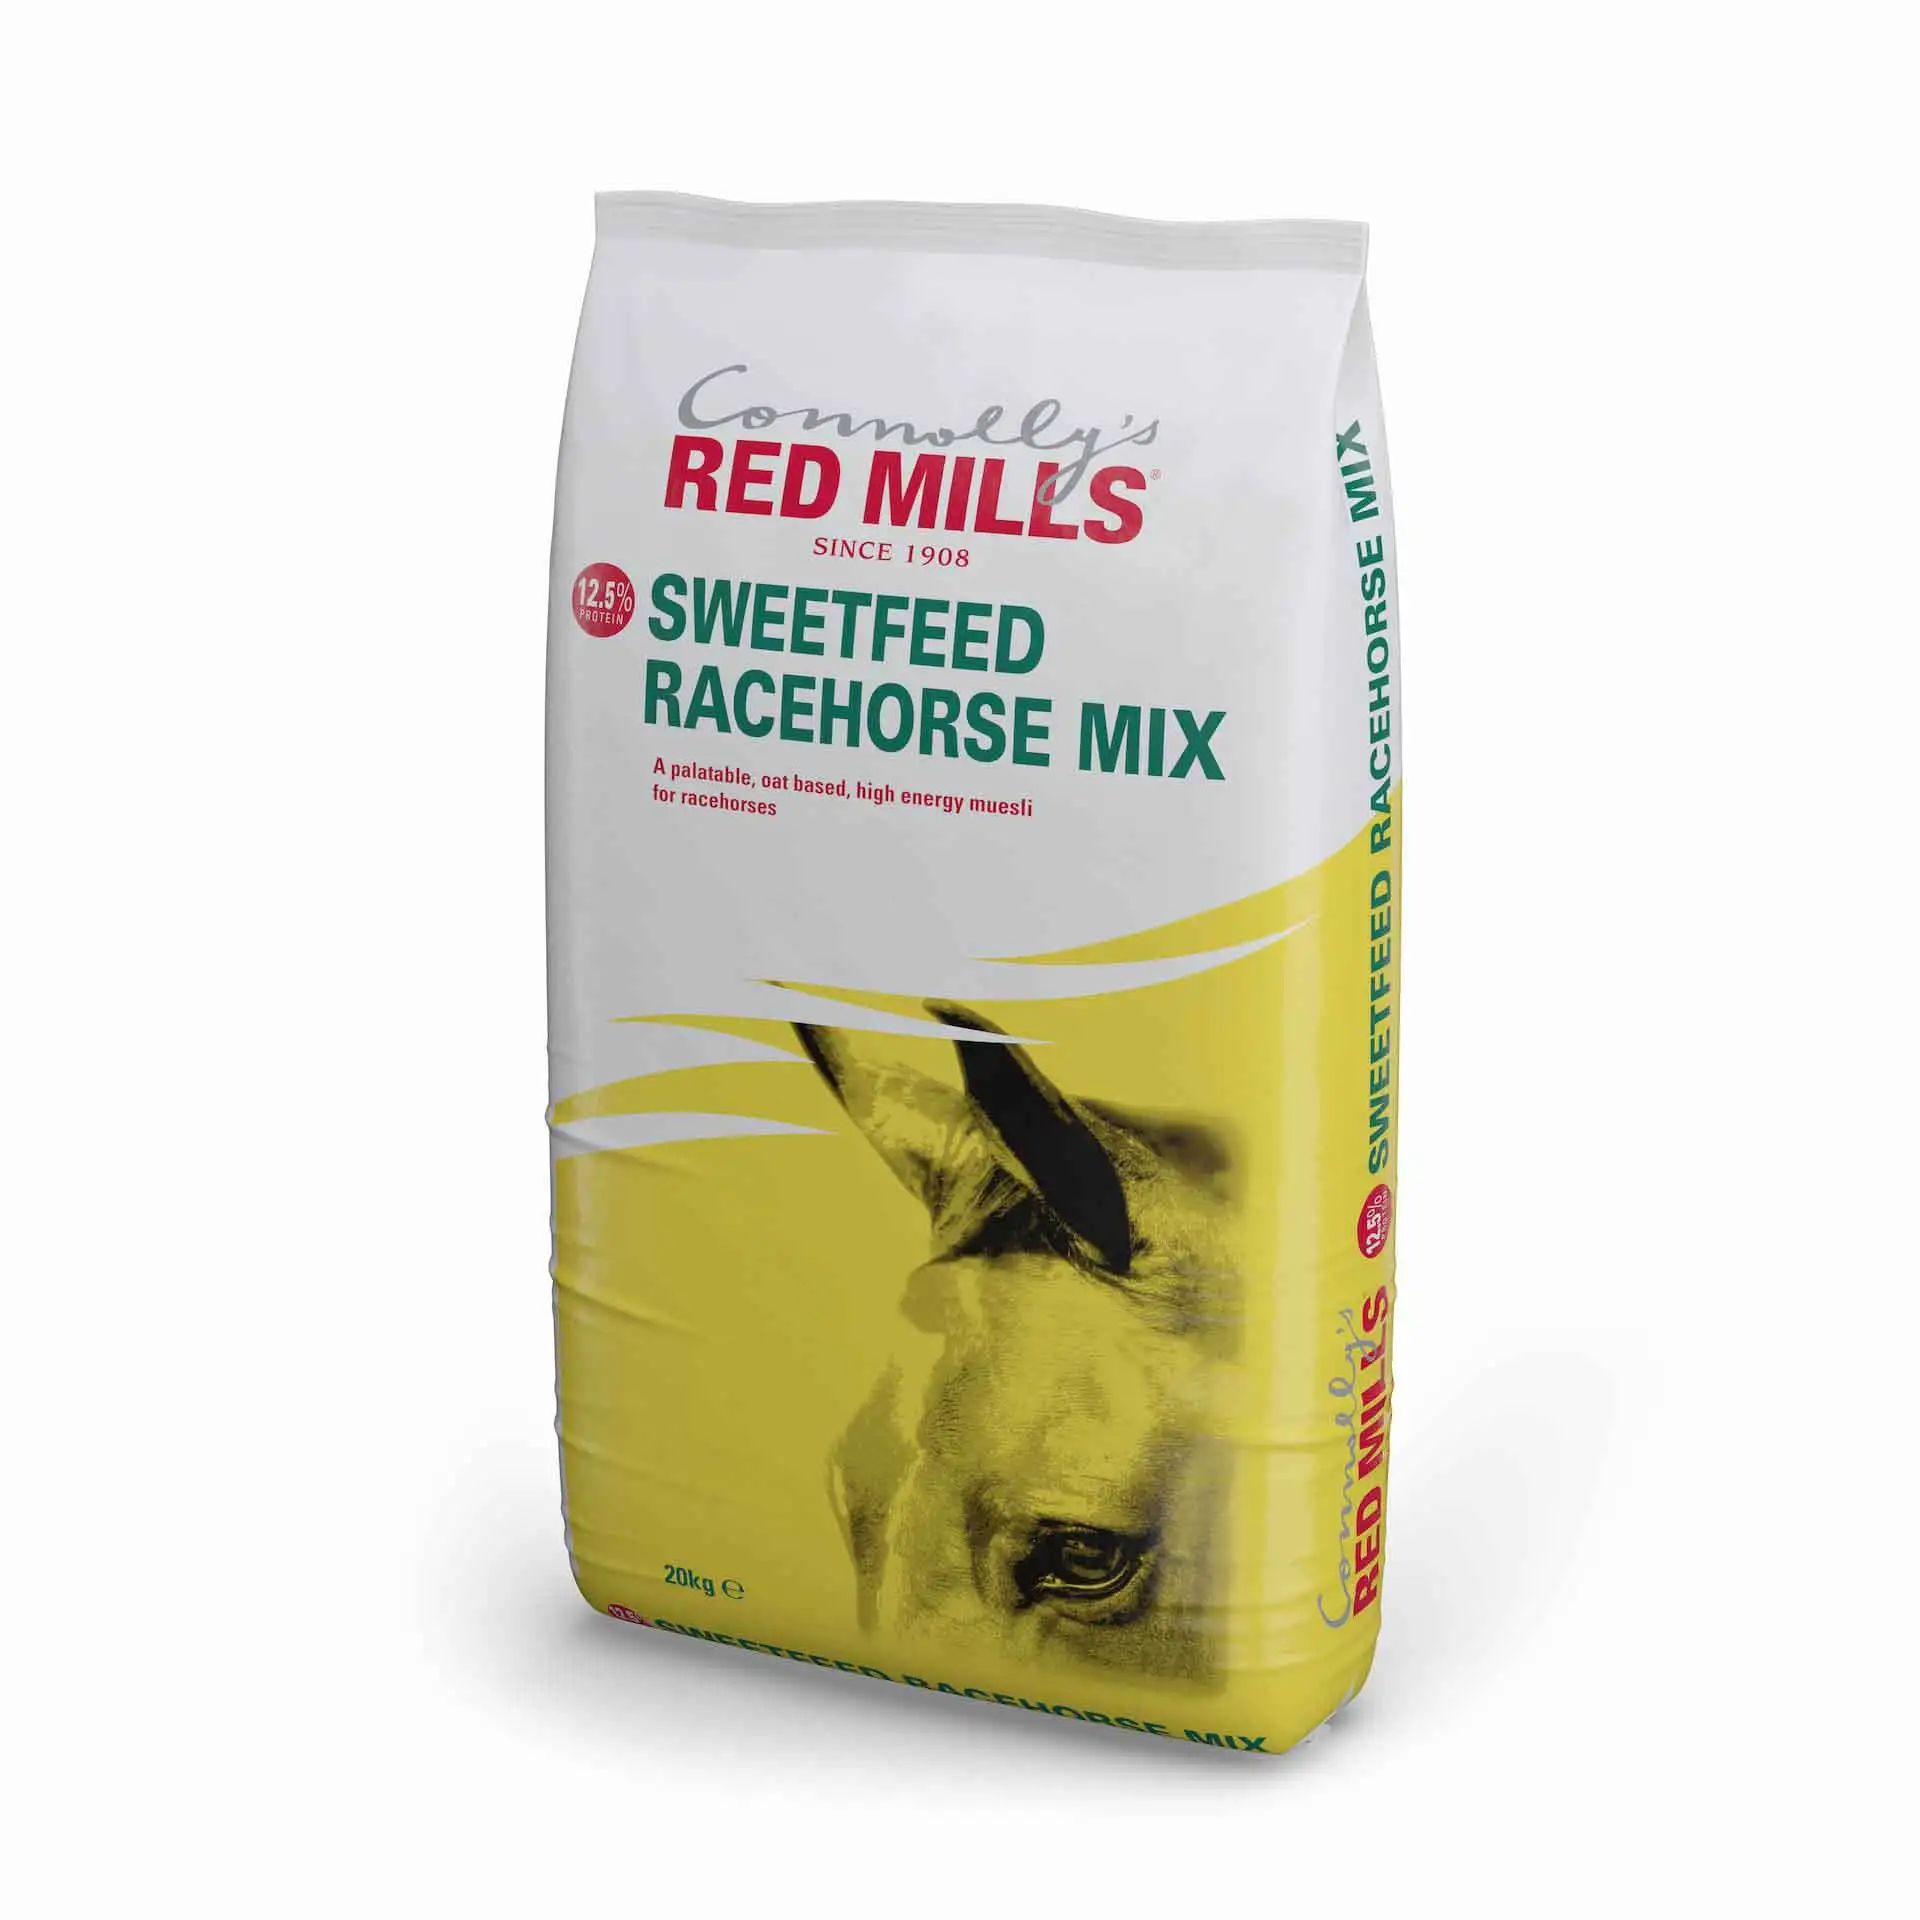 Sweetfeed Racehorse Mix